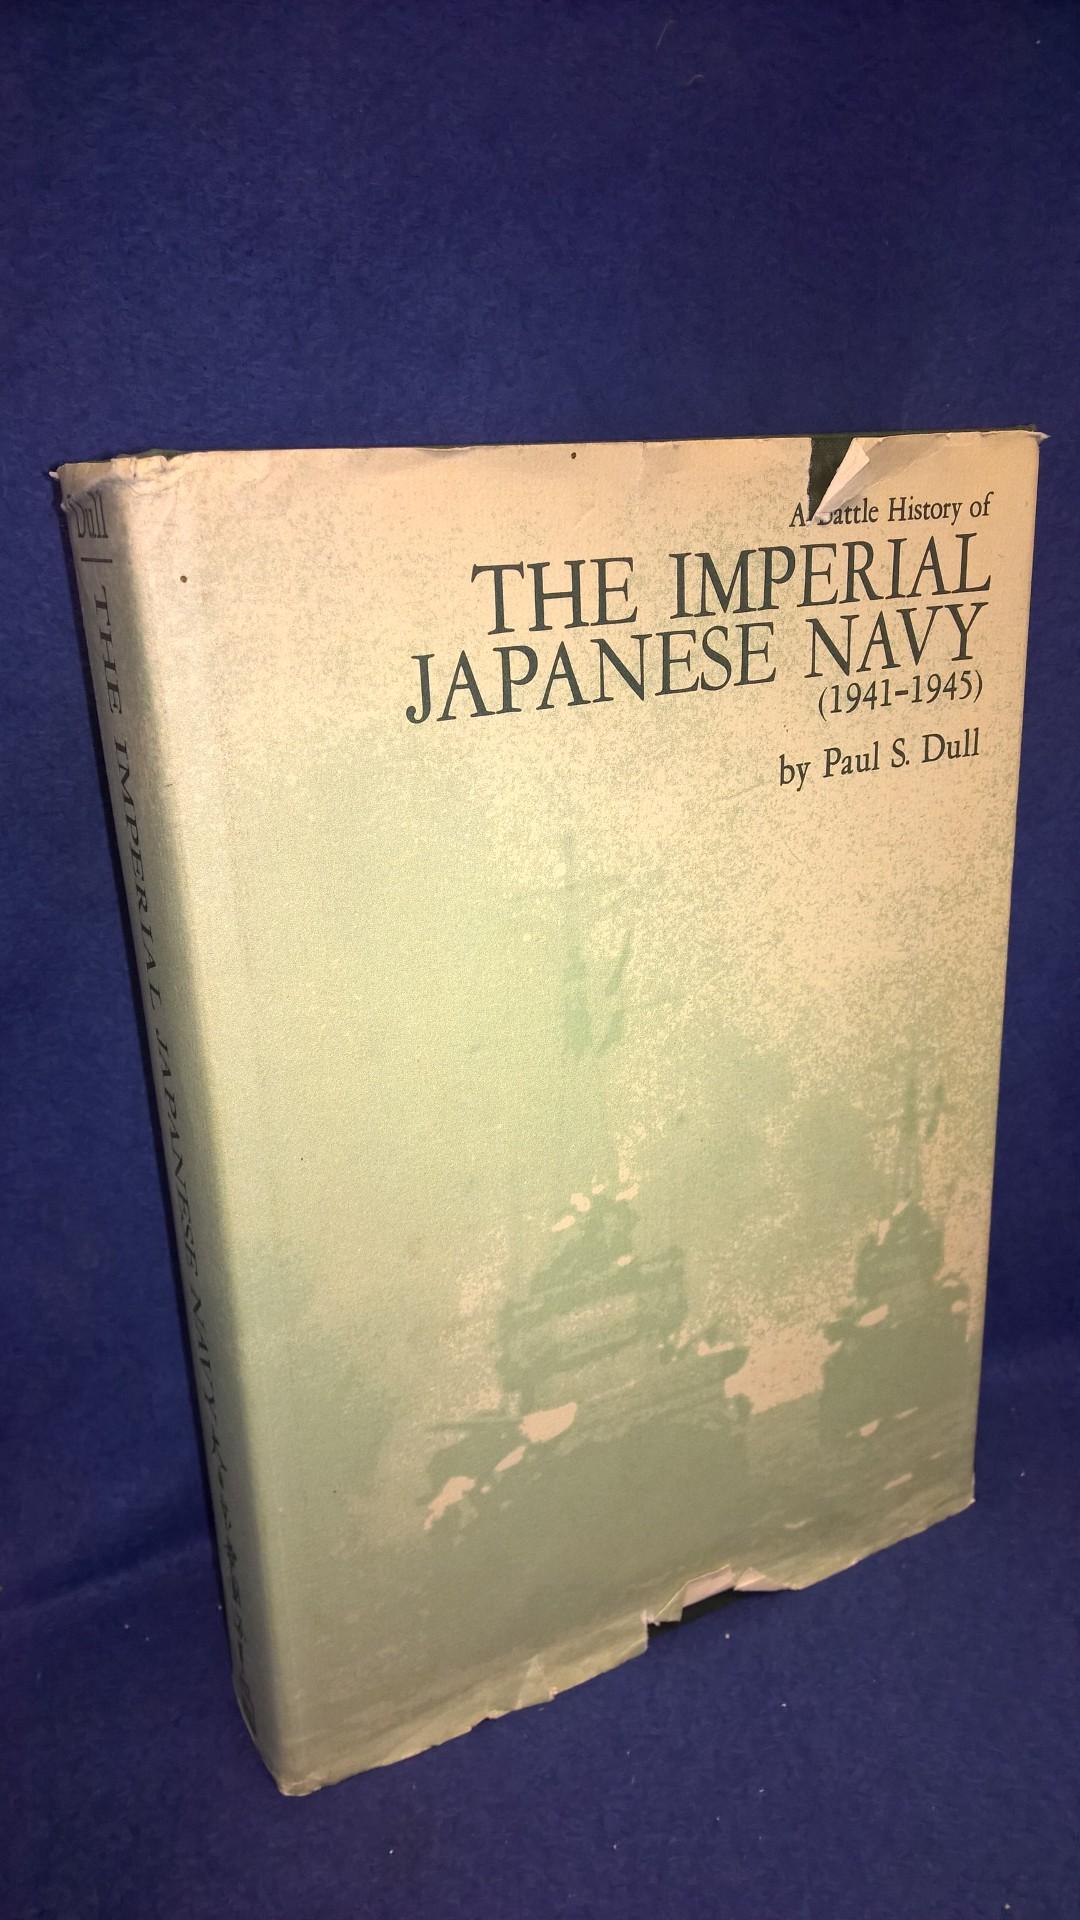 A Battle History of the Imperial Japanese Navy, 1941-1945.